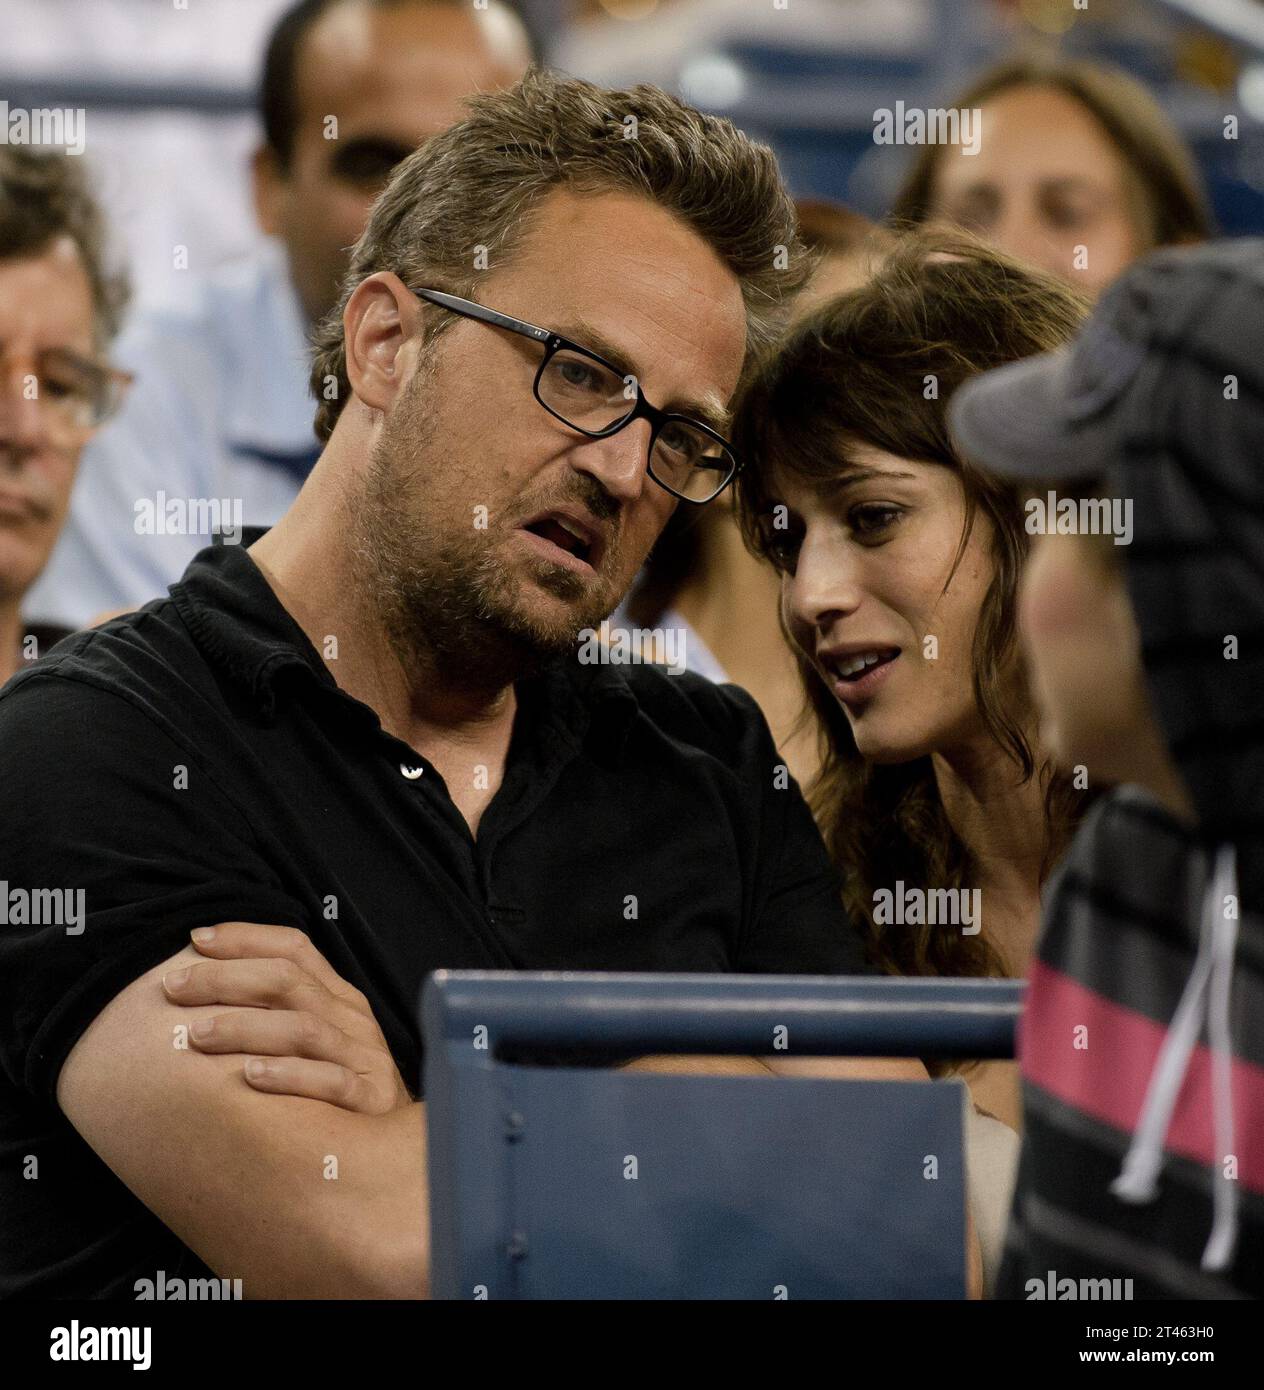 NEW YORK, NY - SEPTEMBER 08:  Matthew Perry attends Day 11 of the 2011 U.S. Open Tennis Championships at the USTA Billie Jean King National Tennis Center in Flushing, Queens, New York, USA.on September 8, 2011 in the Flushing neighborhood of the Queens borough of New York City.   People:  Matthew Perry Stock Photo